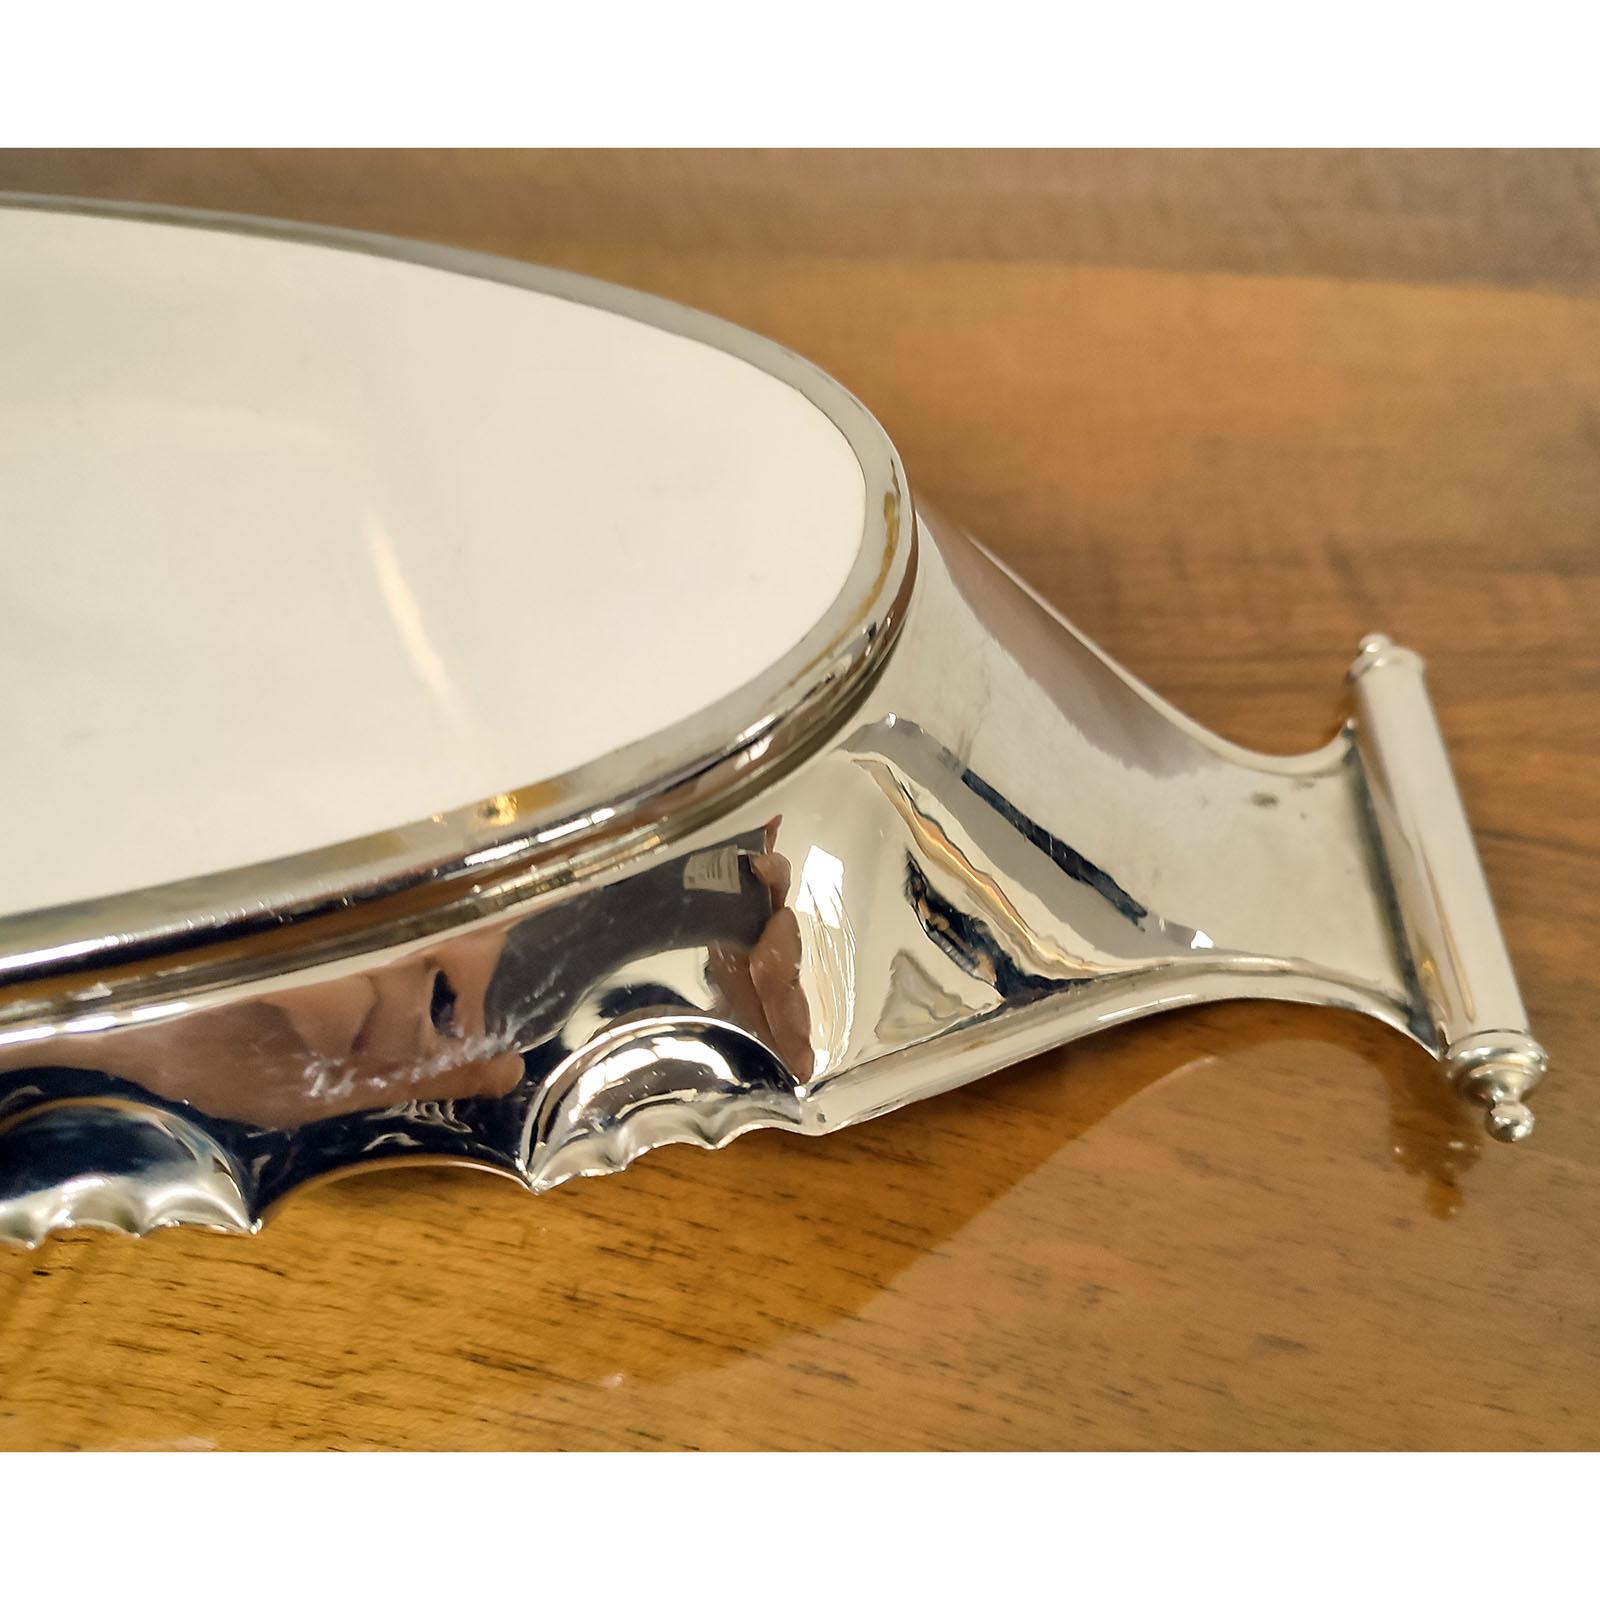 Art Nouveau Villeroy & Boch Silver Plated Serving Tray, circa 1900 For Sale 6